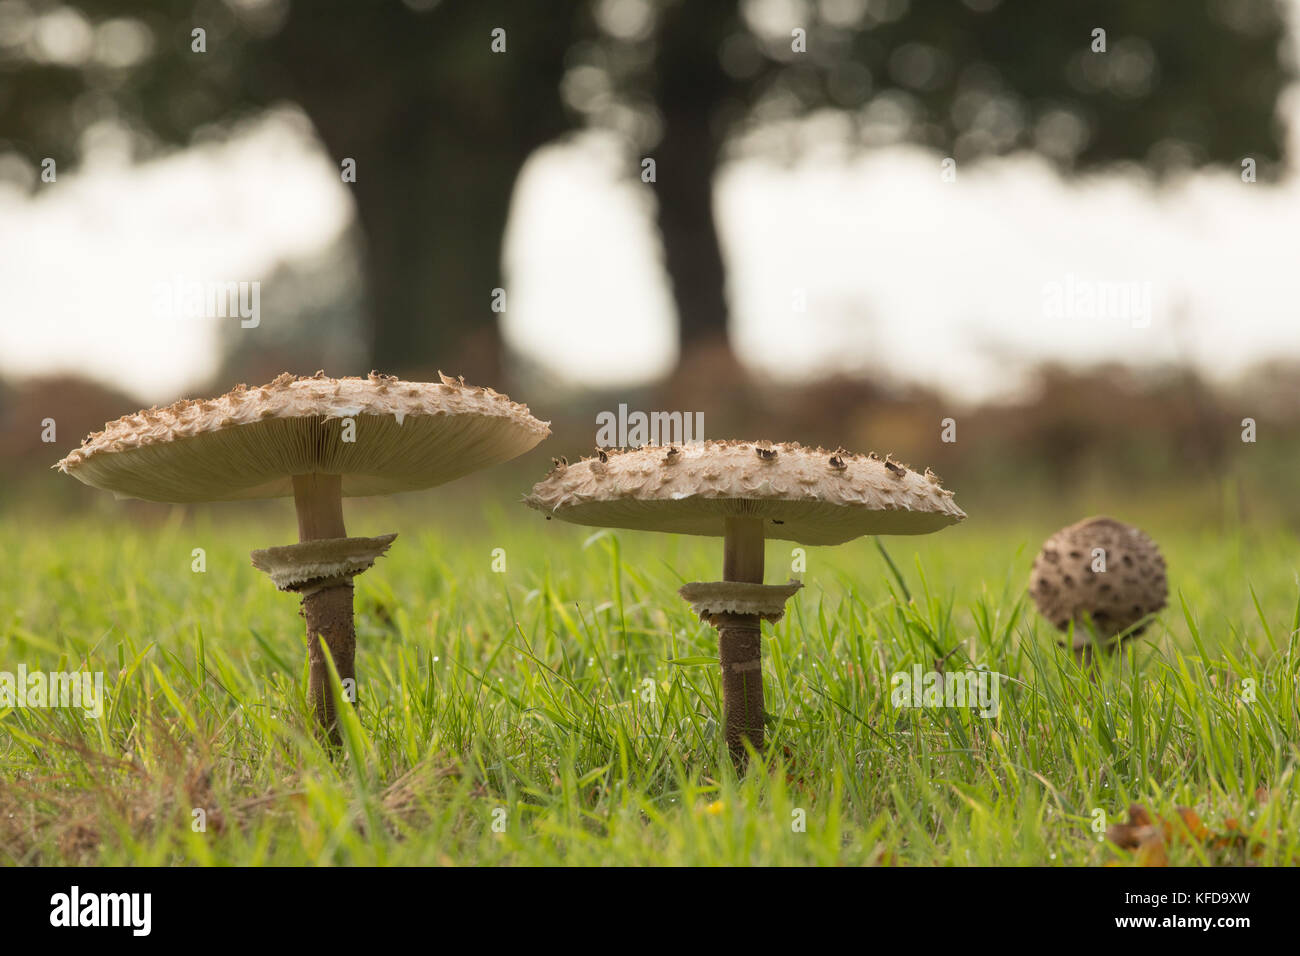 Edible parasol mushrooms in a field in East Anglia, England. Stock Photo